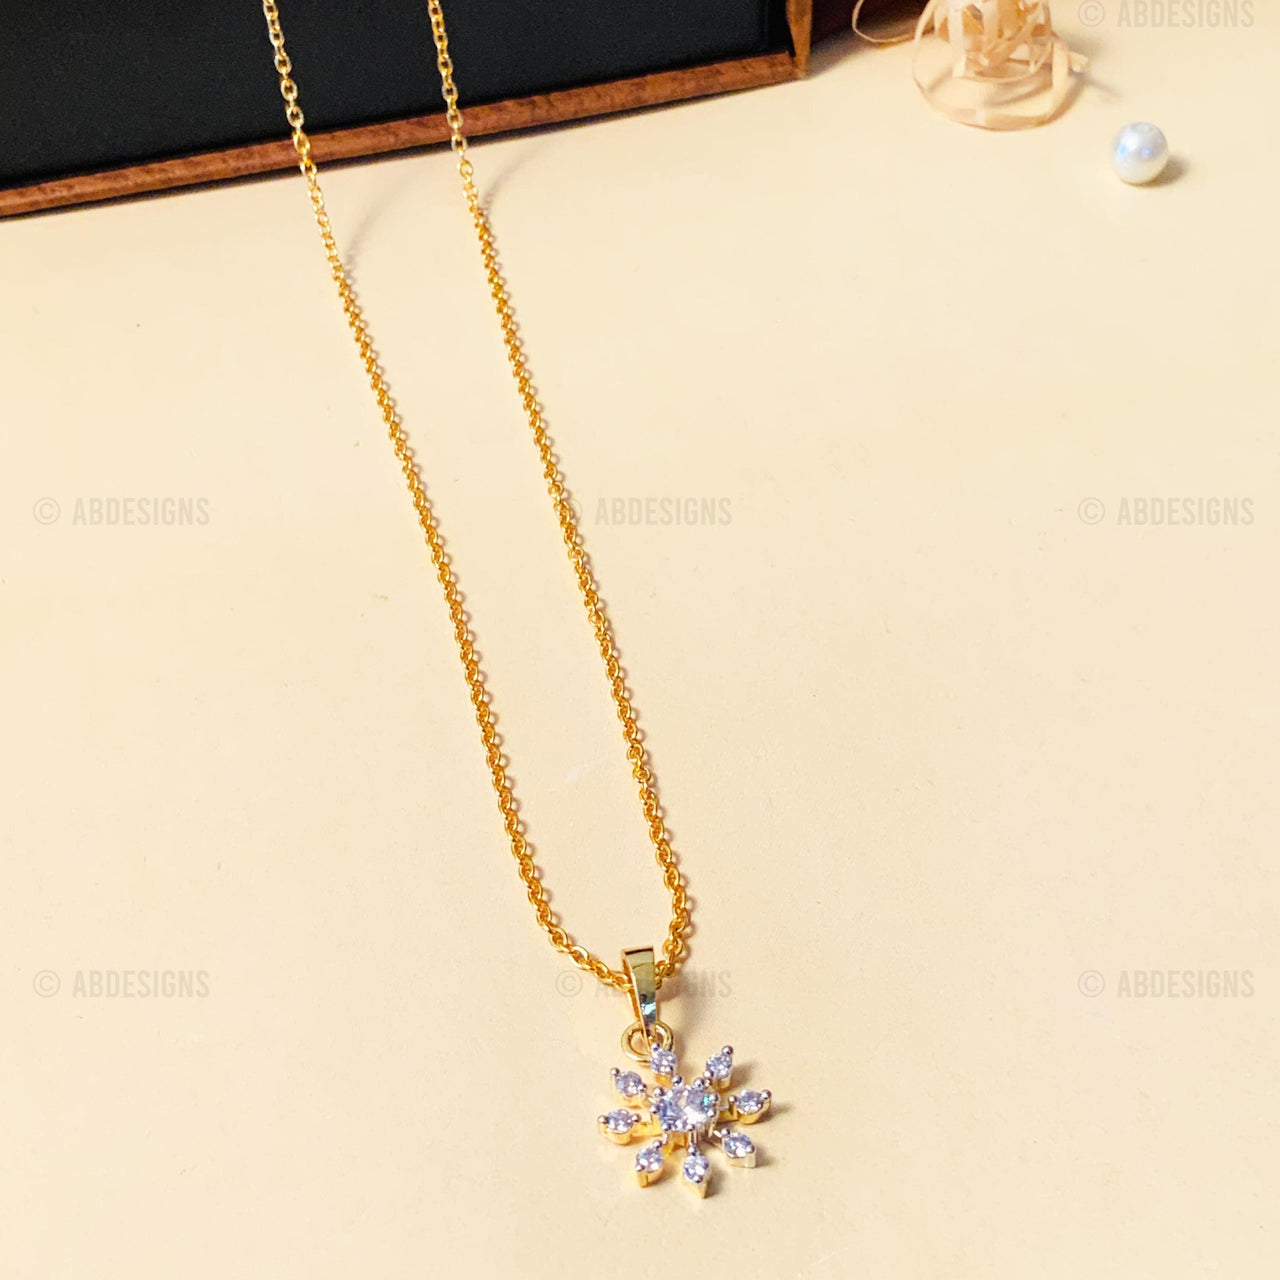 Luxurious High-Quality Gold Plated Pendant Chain